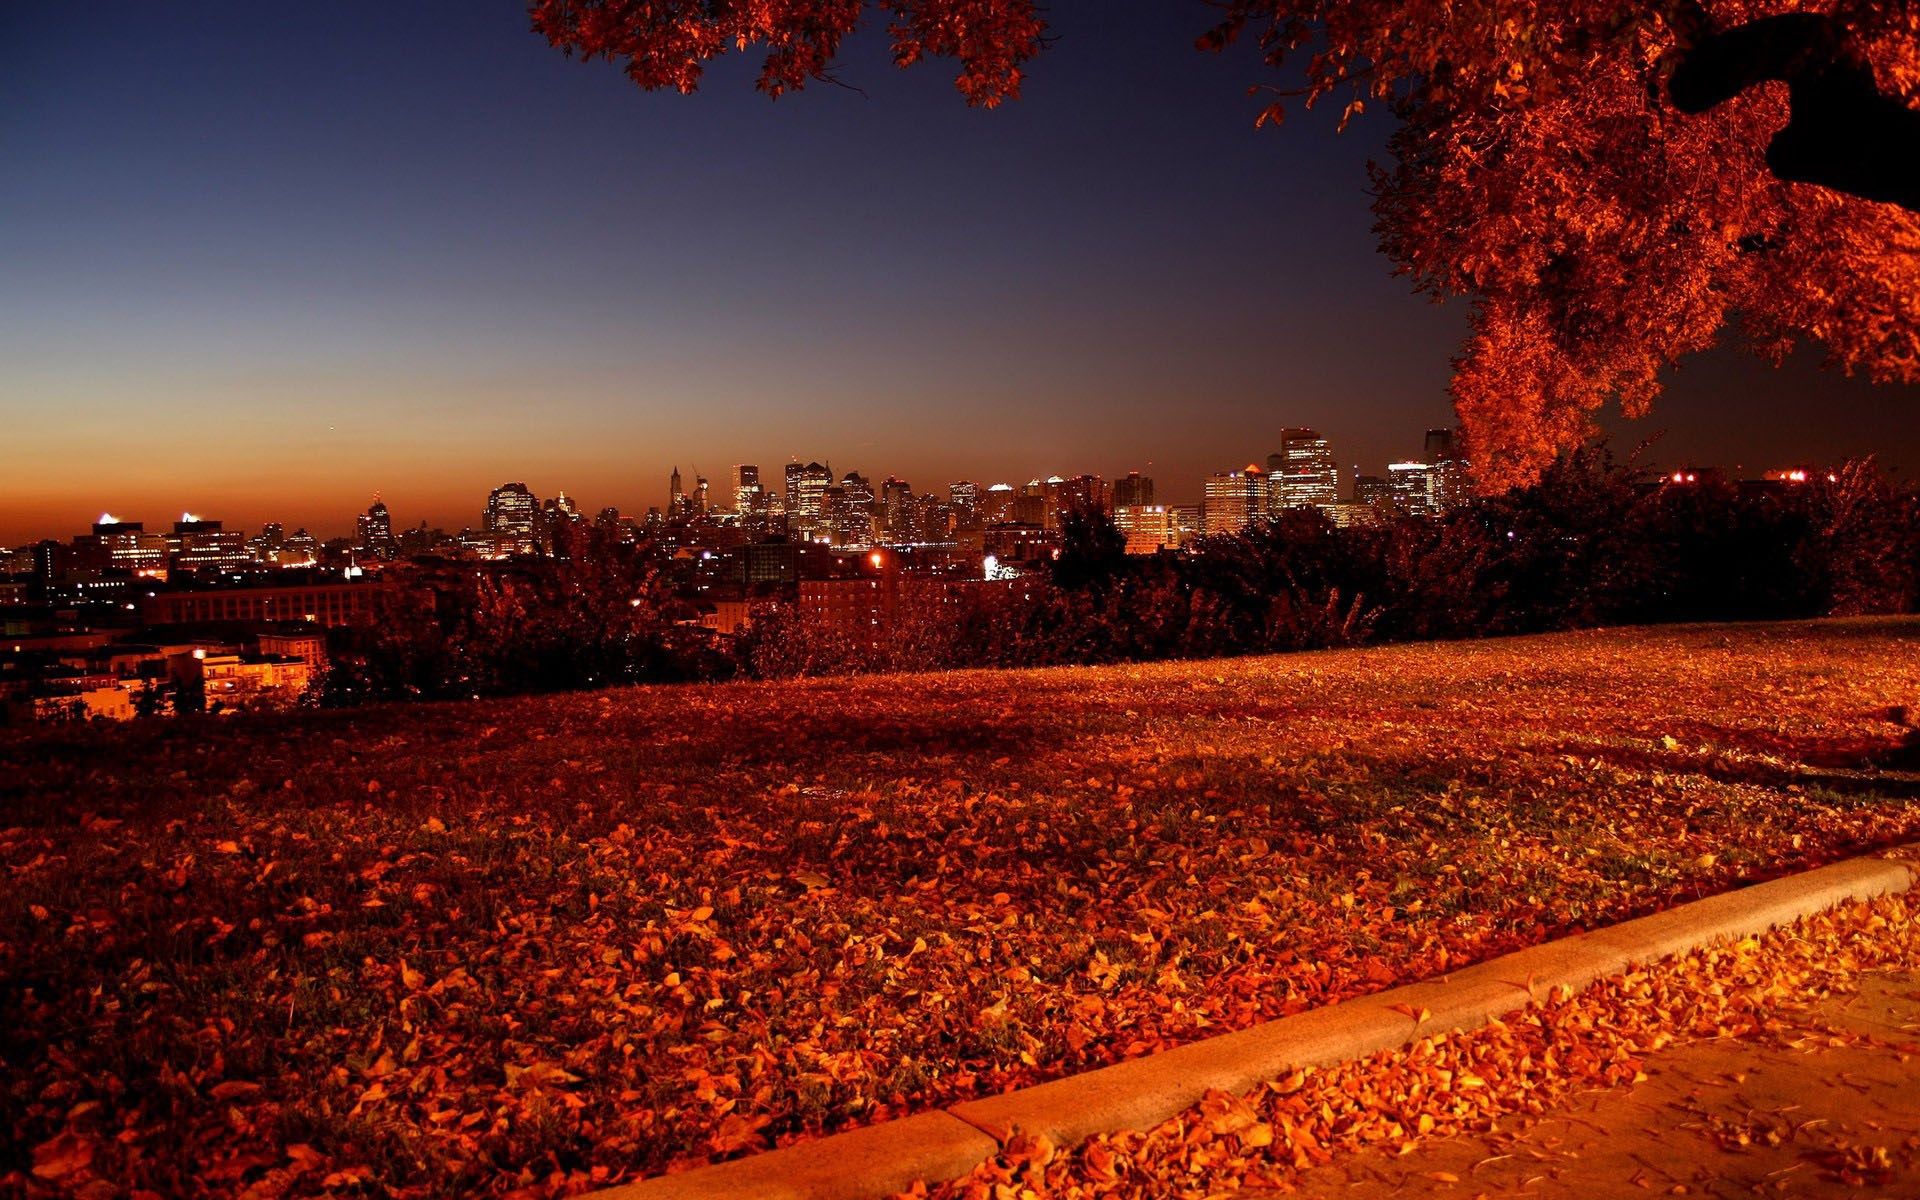 Autumn Fall Night Wallpapers